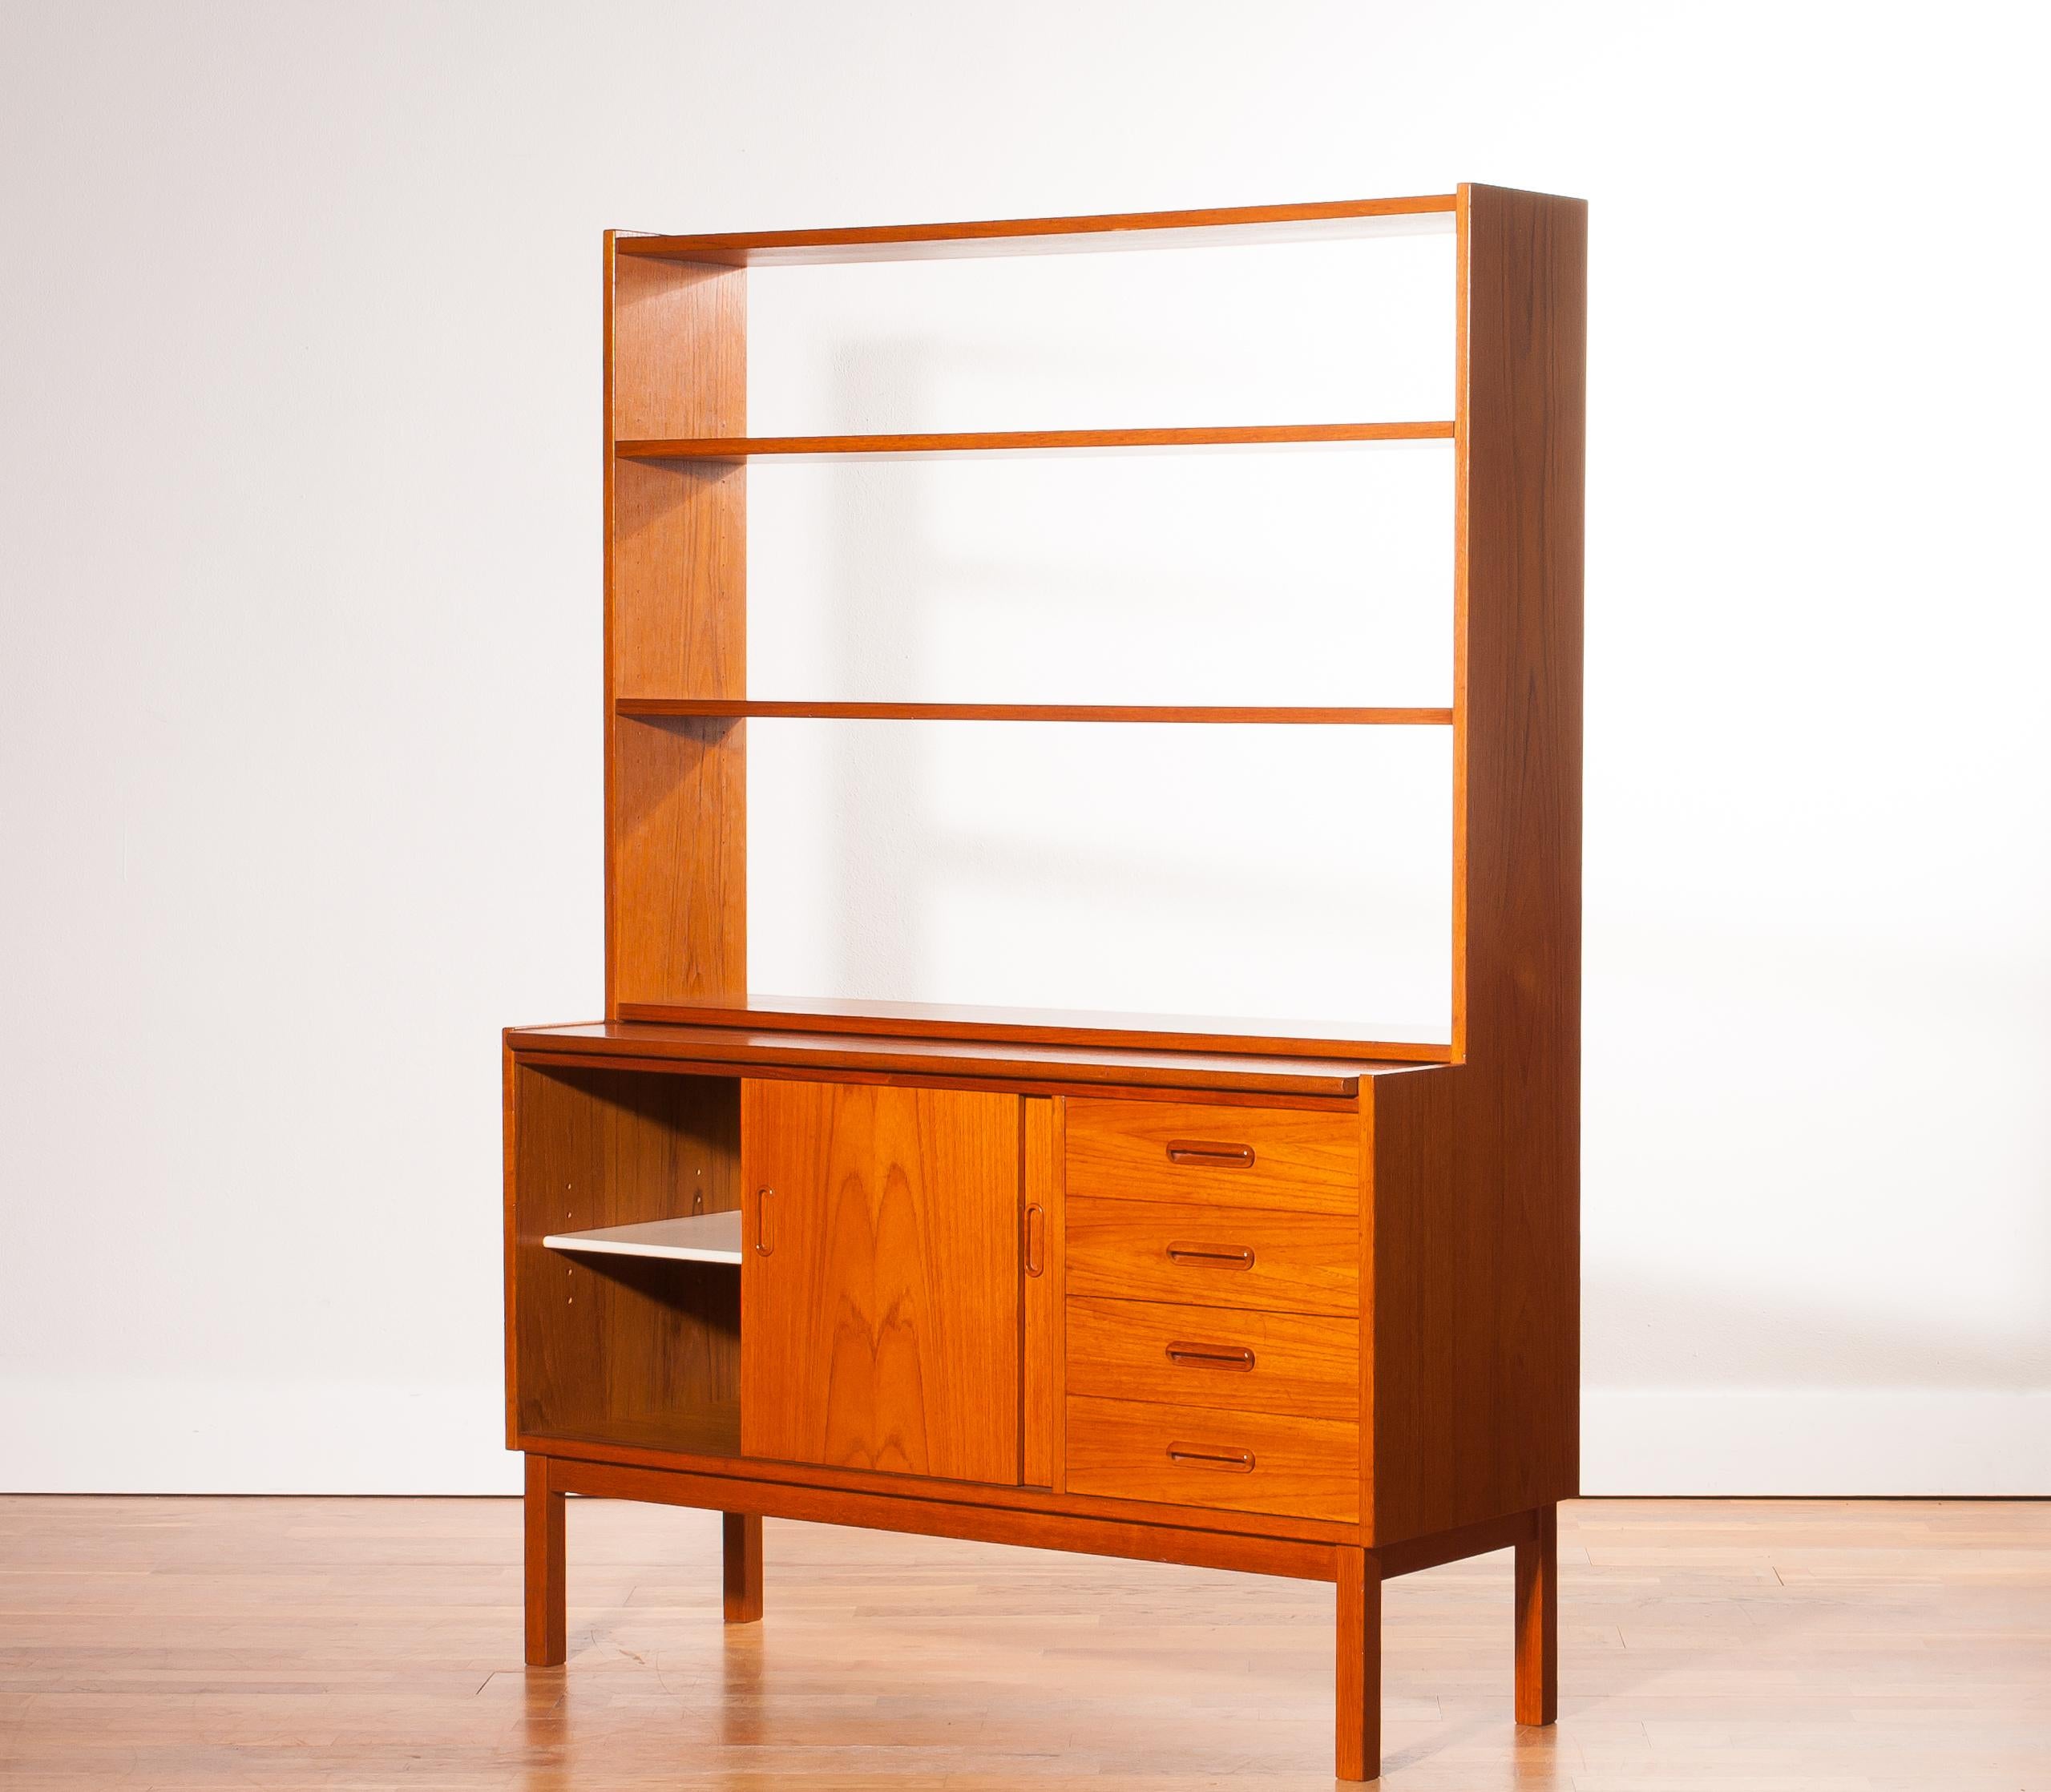 1960s, Teak Book Case with Slidable Writing or Working Space from Sweden 1